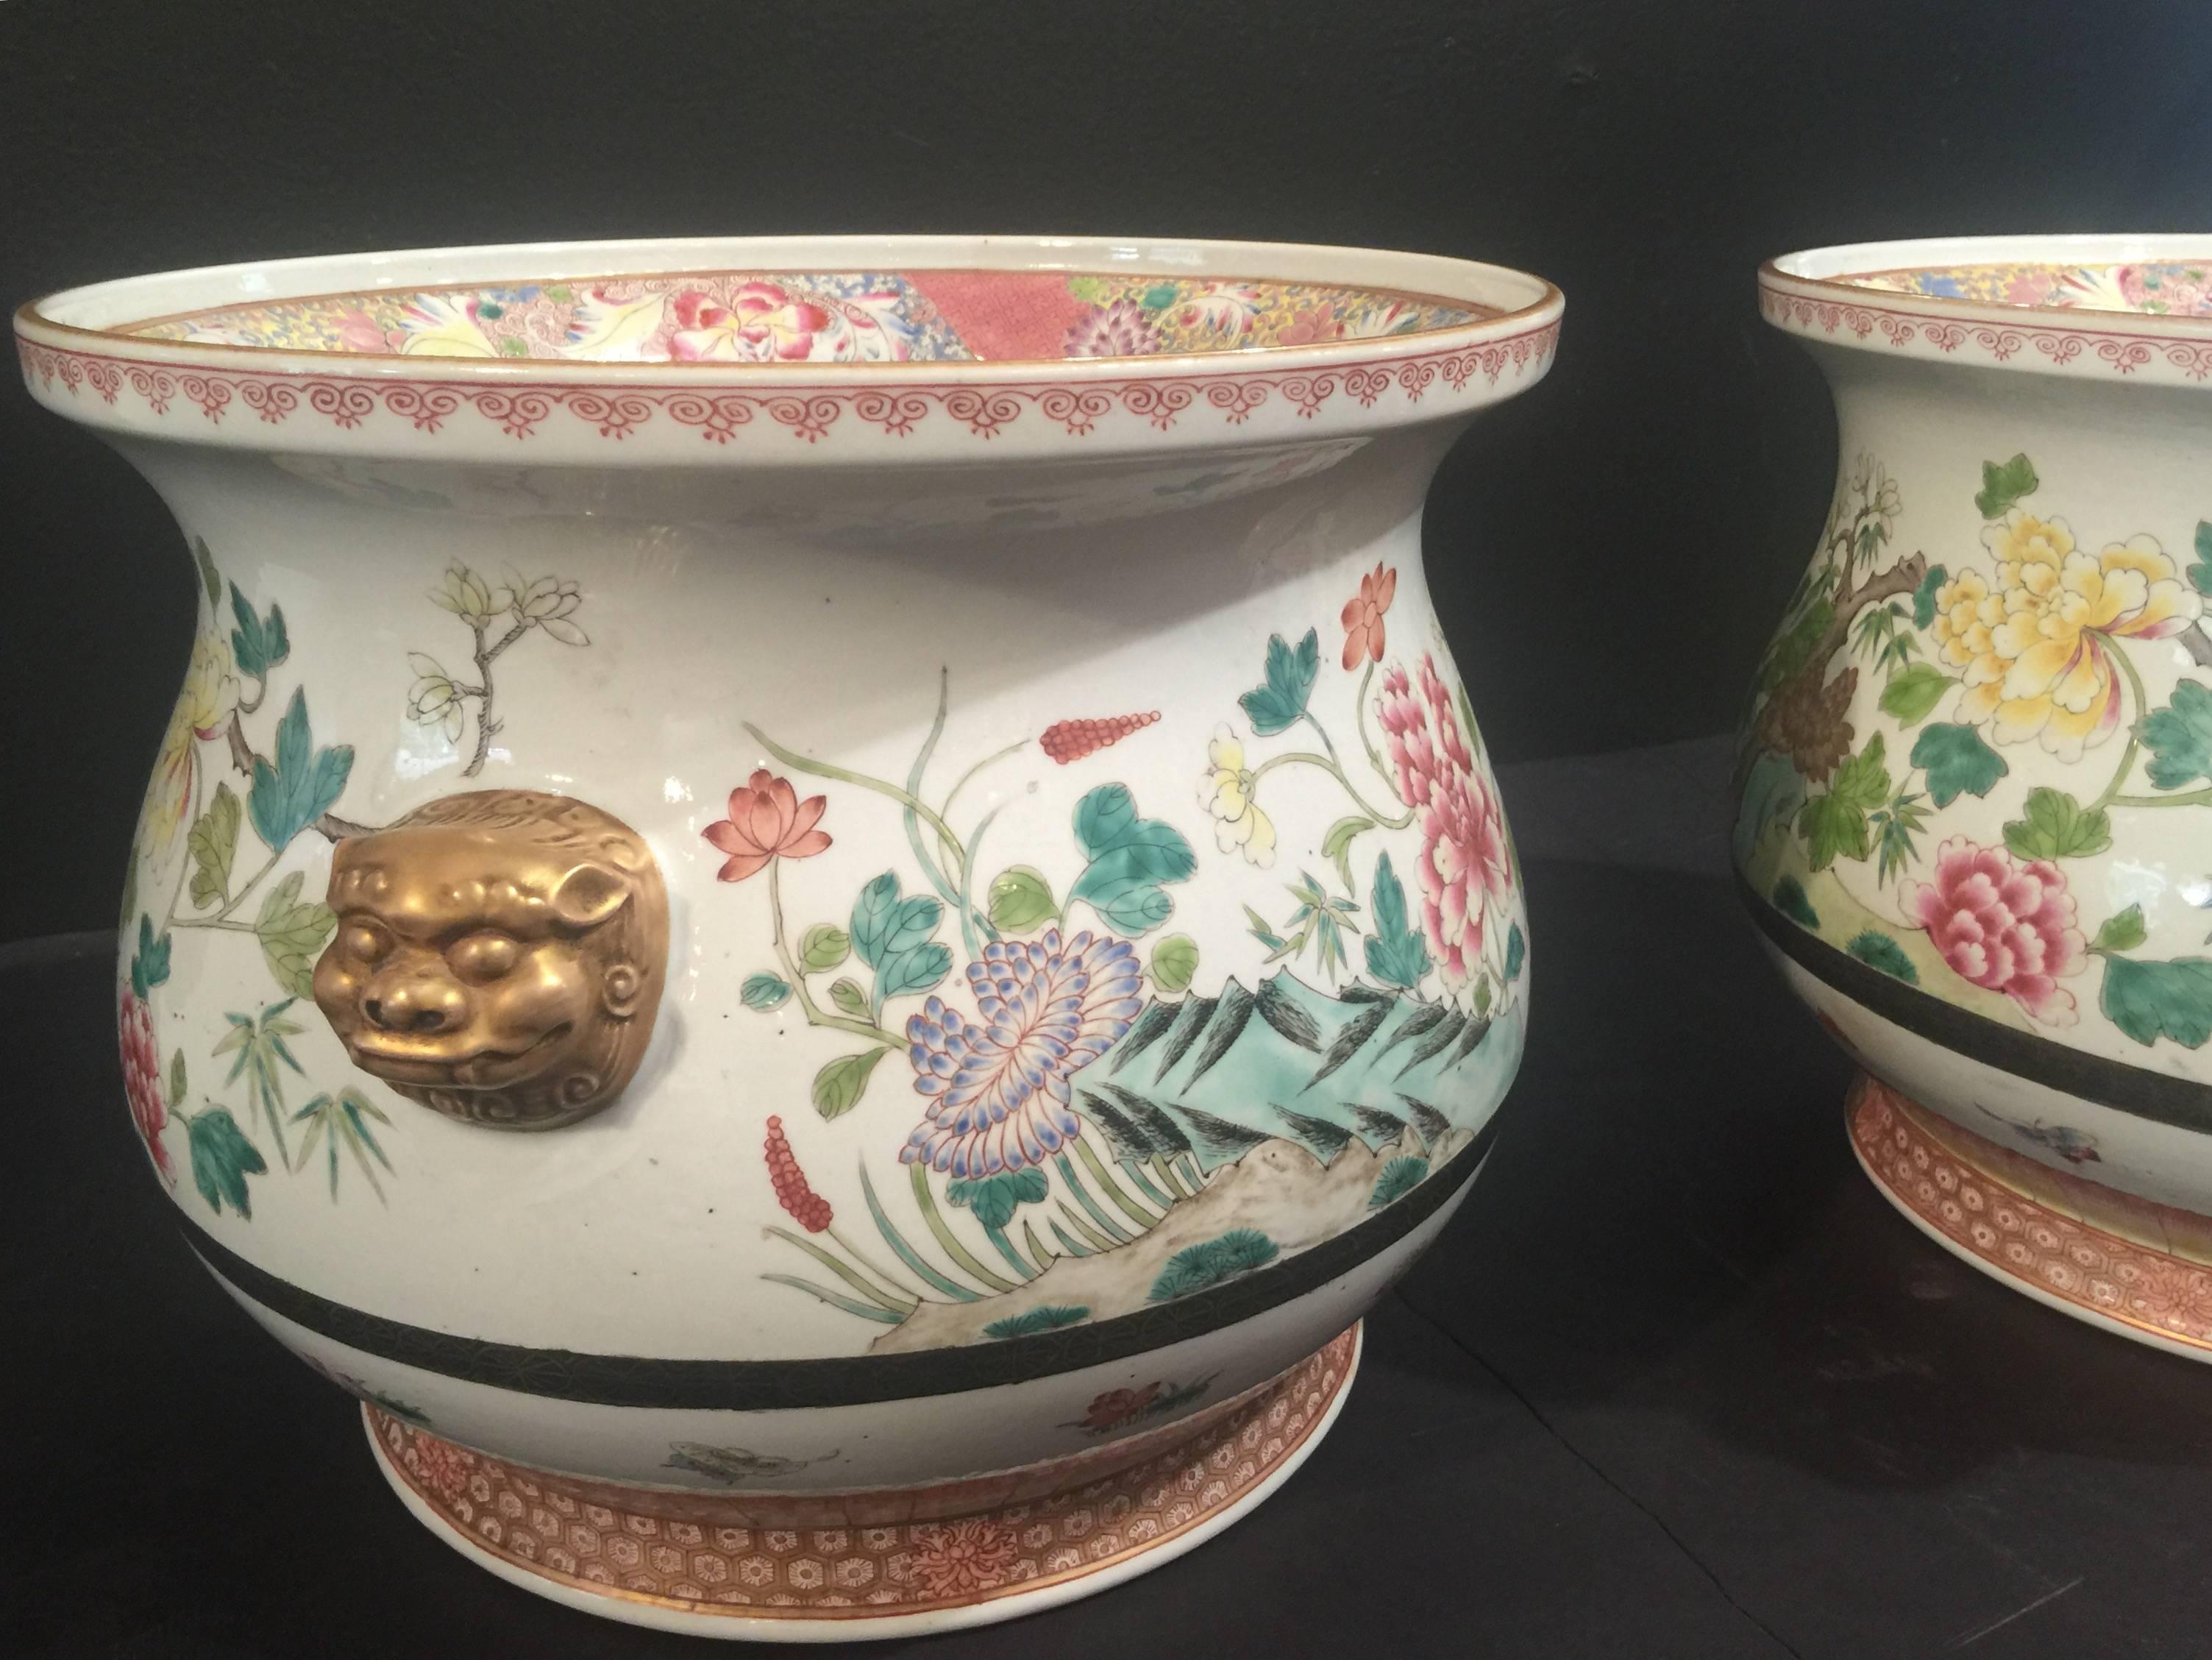 A stunning pair of Chinese porcelain cachepots, finely painted in famille rose enamels. The bulbous body features a Traditional Design of blossoming flowers, including peony, lotus, chrysanthemum and dogwood, with a pair gilt lion mask handles. The